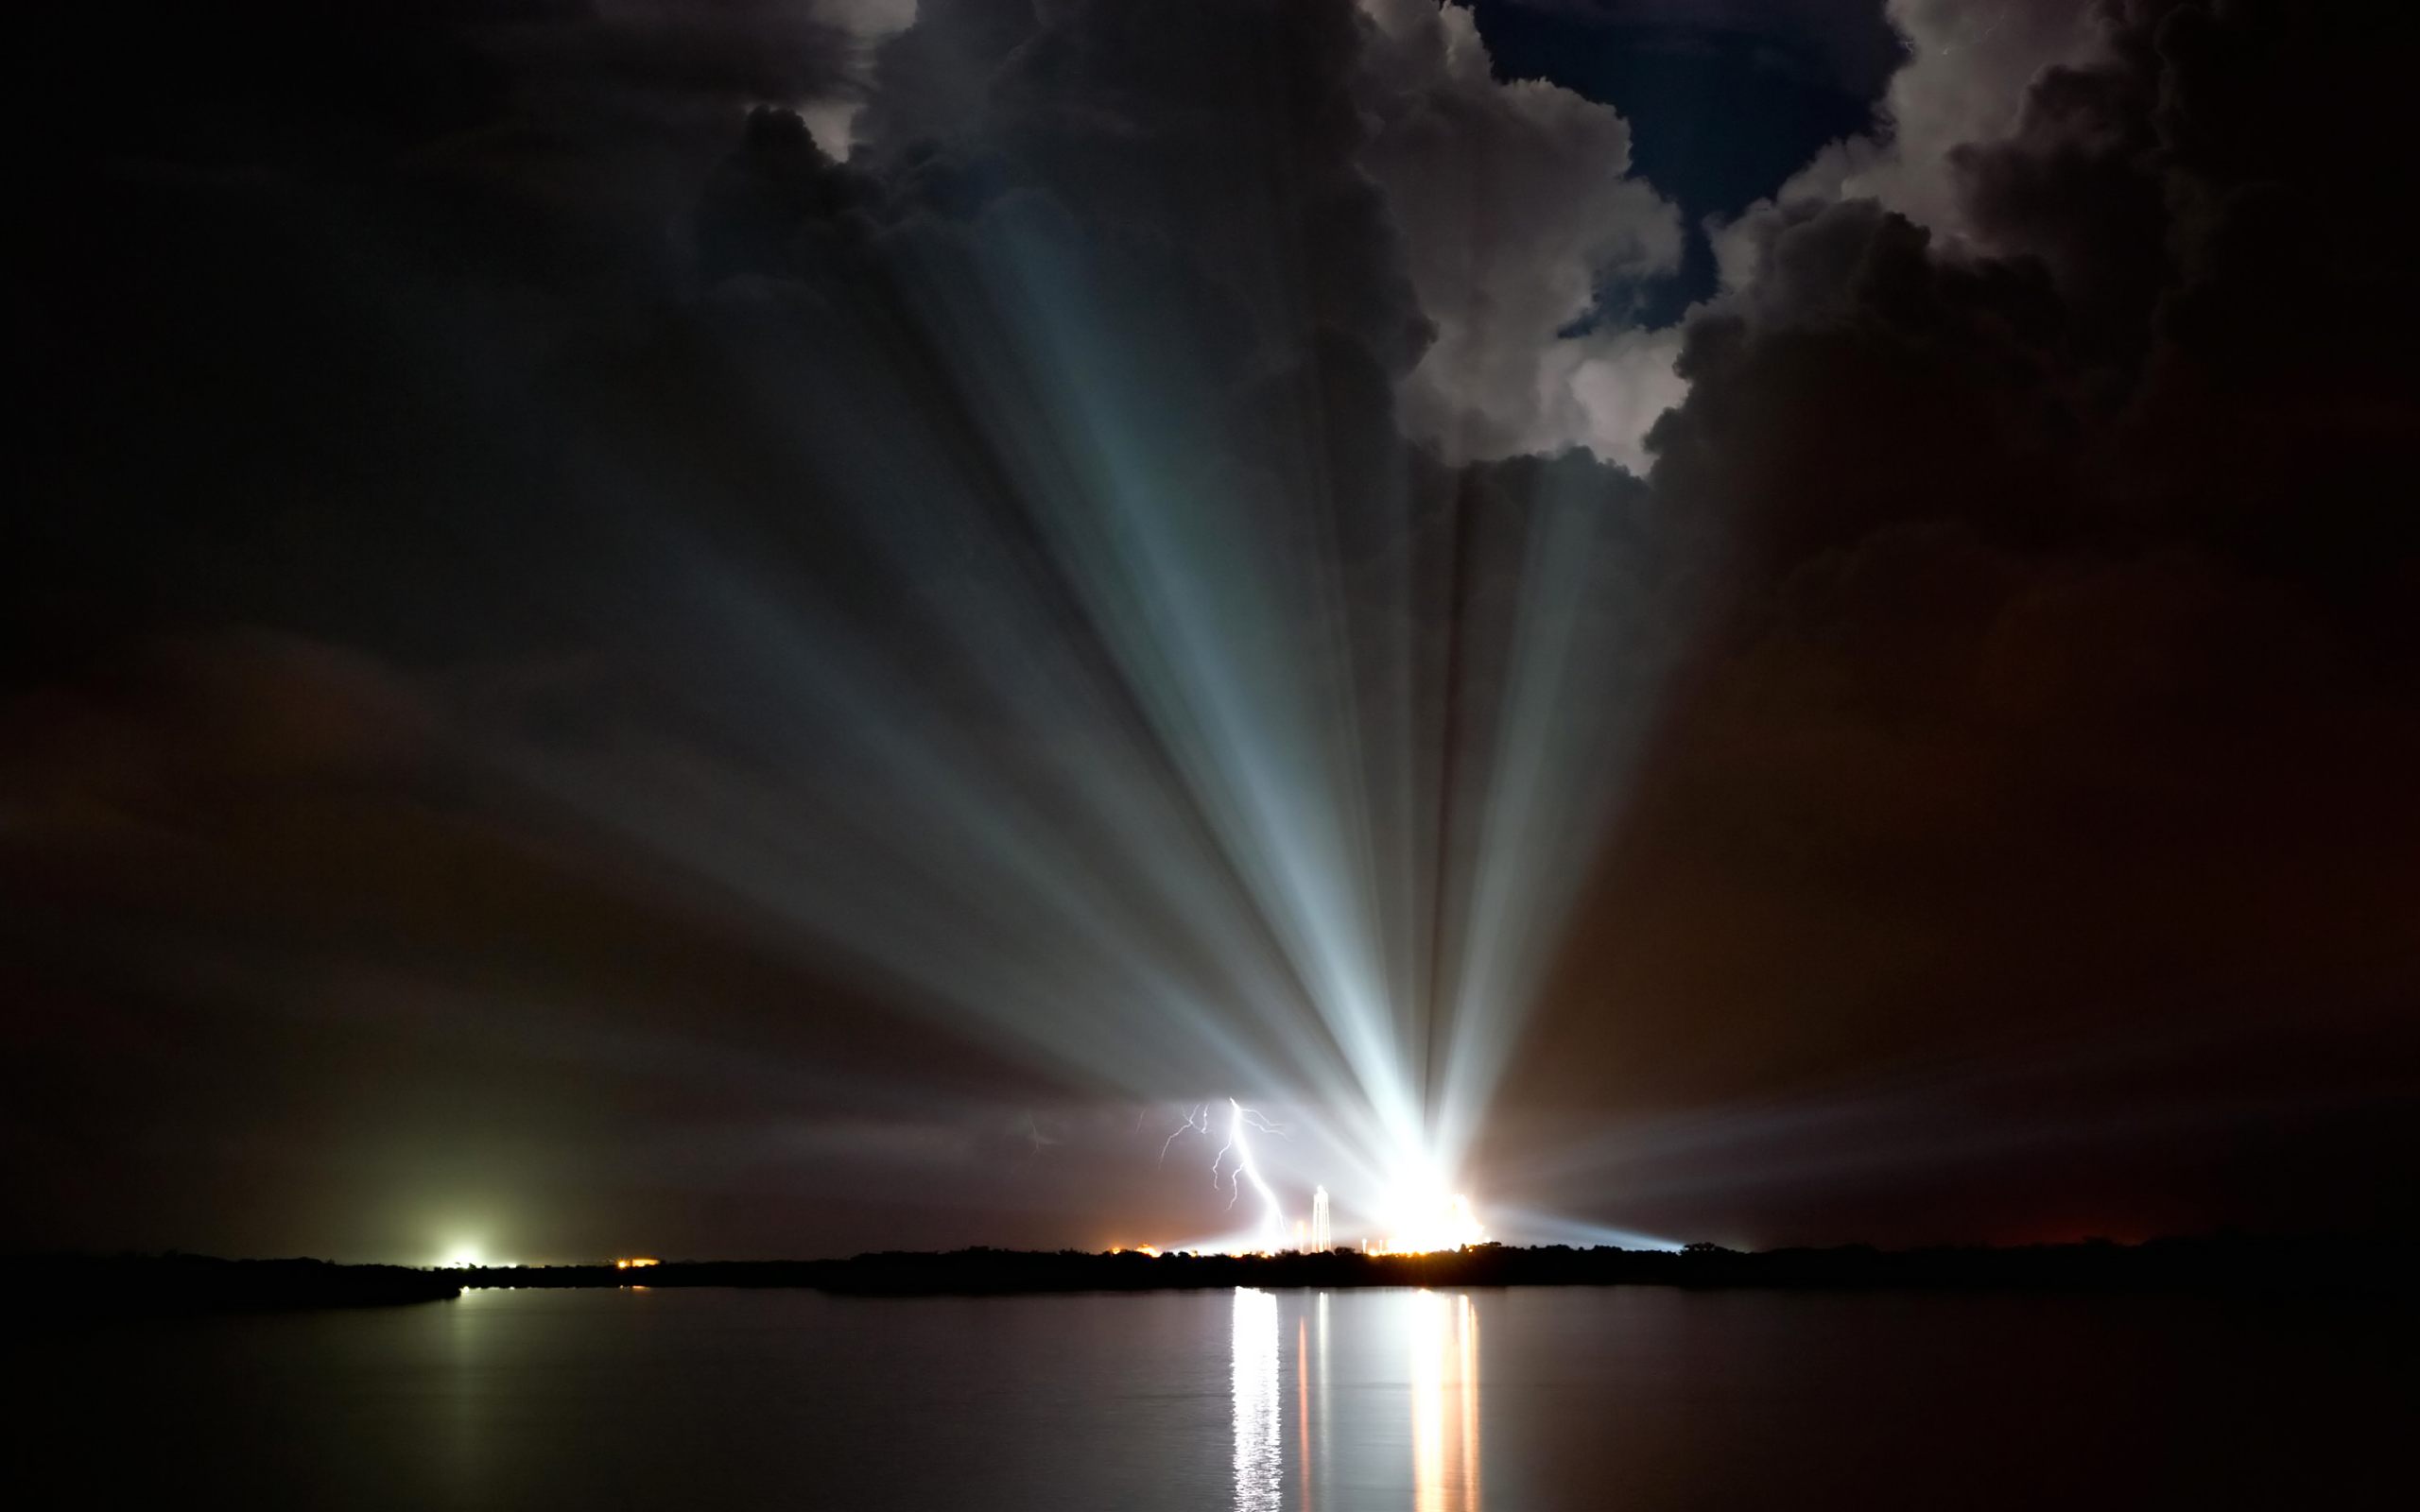 NASA's Space Shuttle Discovery radiates stunning lights against a dark backdrop, showcasing man-made brilliance.